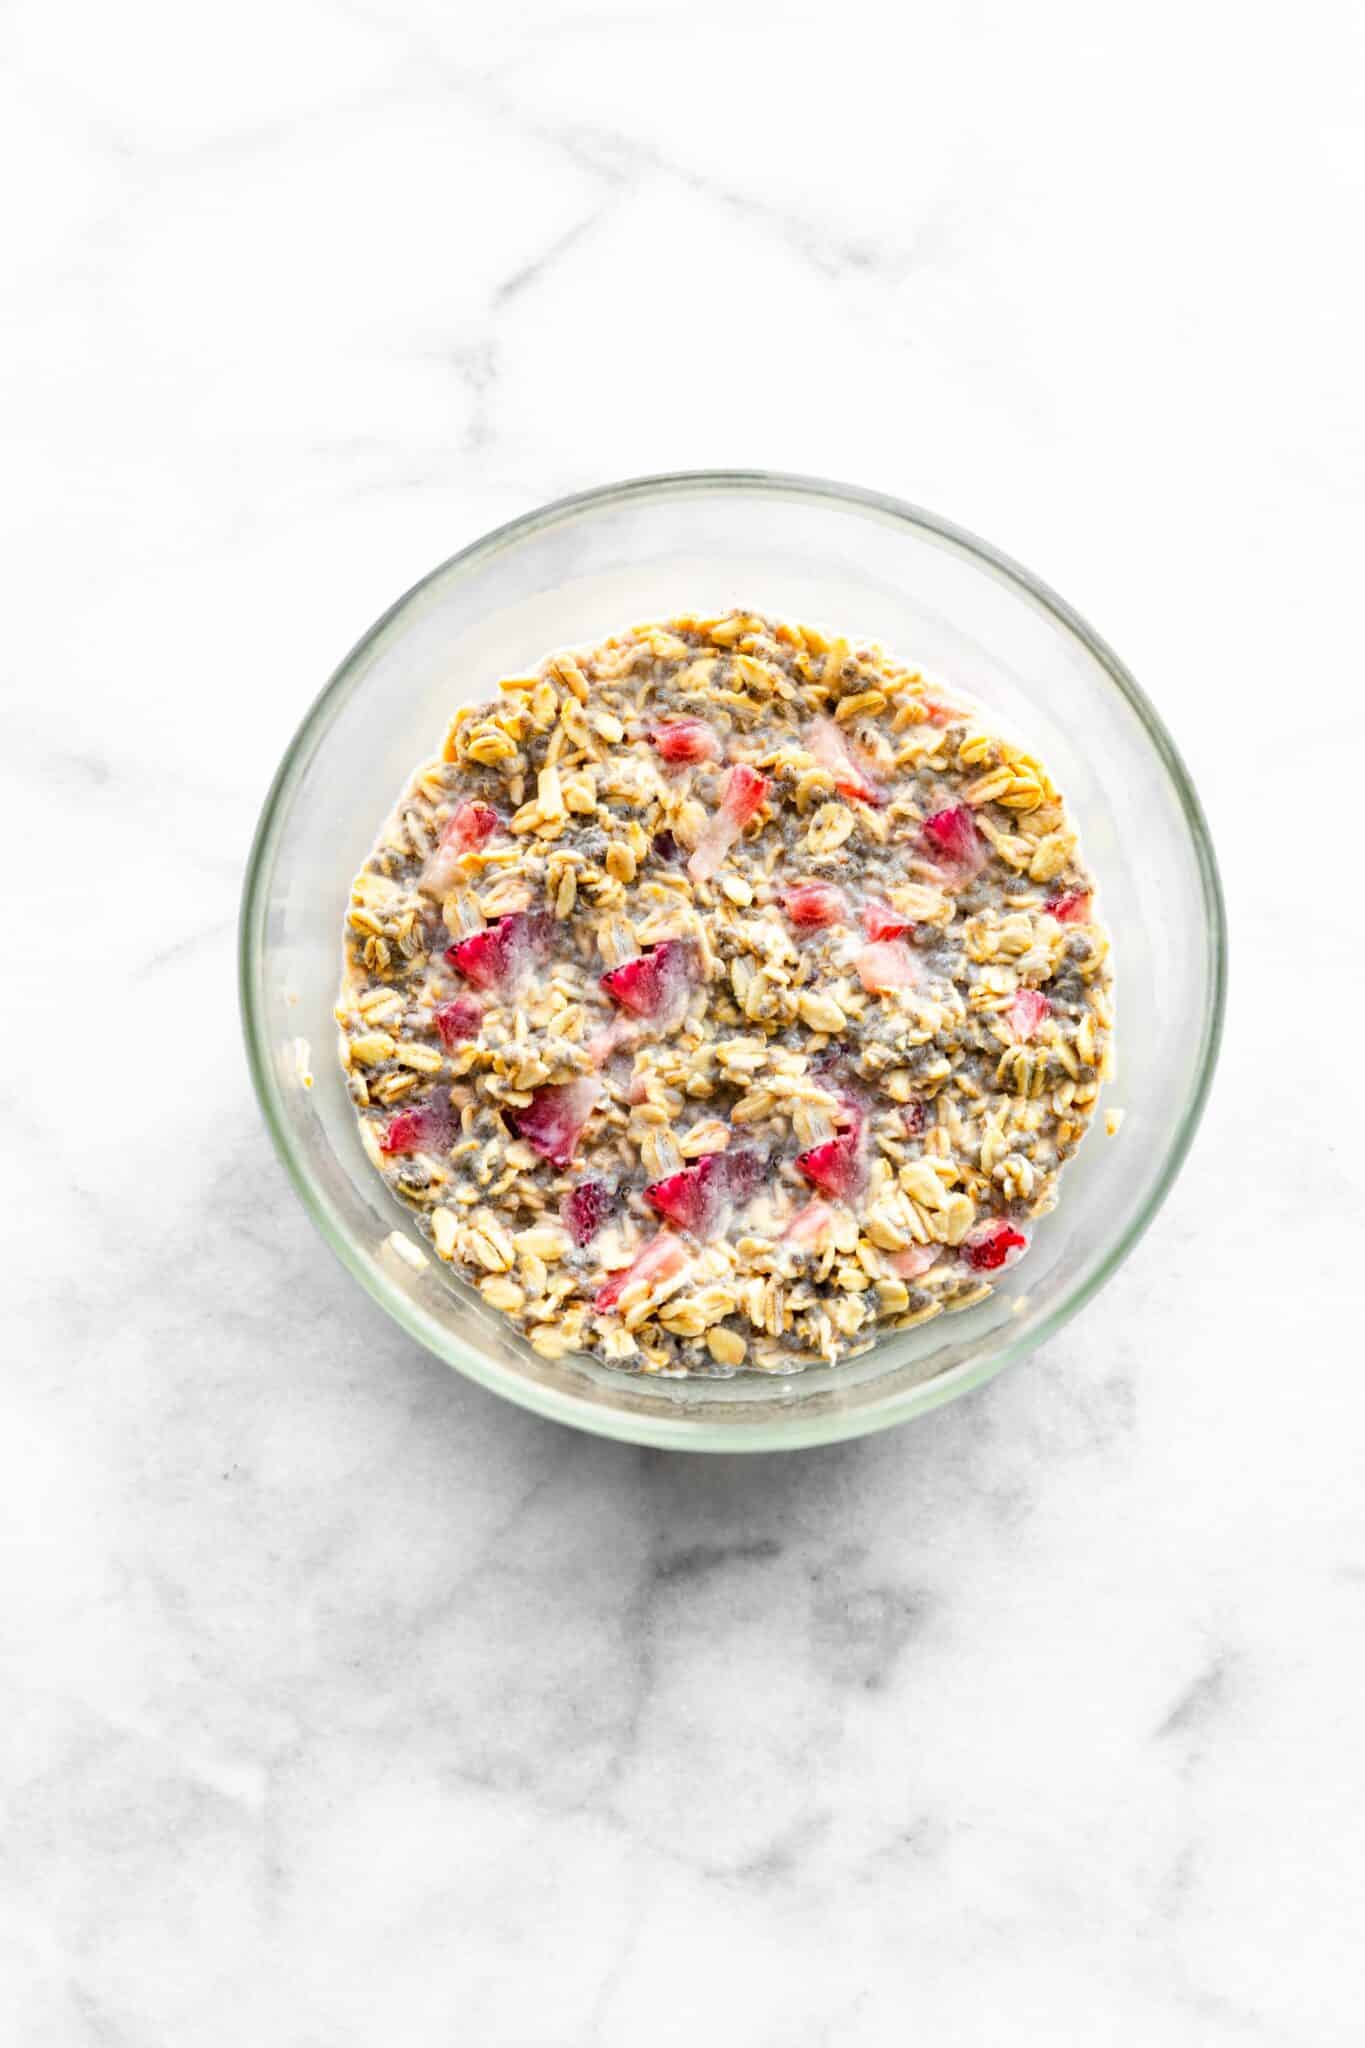 Strawberry overnight oats in a clear glass bowl on a white countertop.